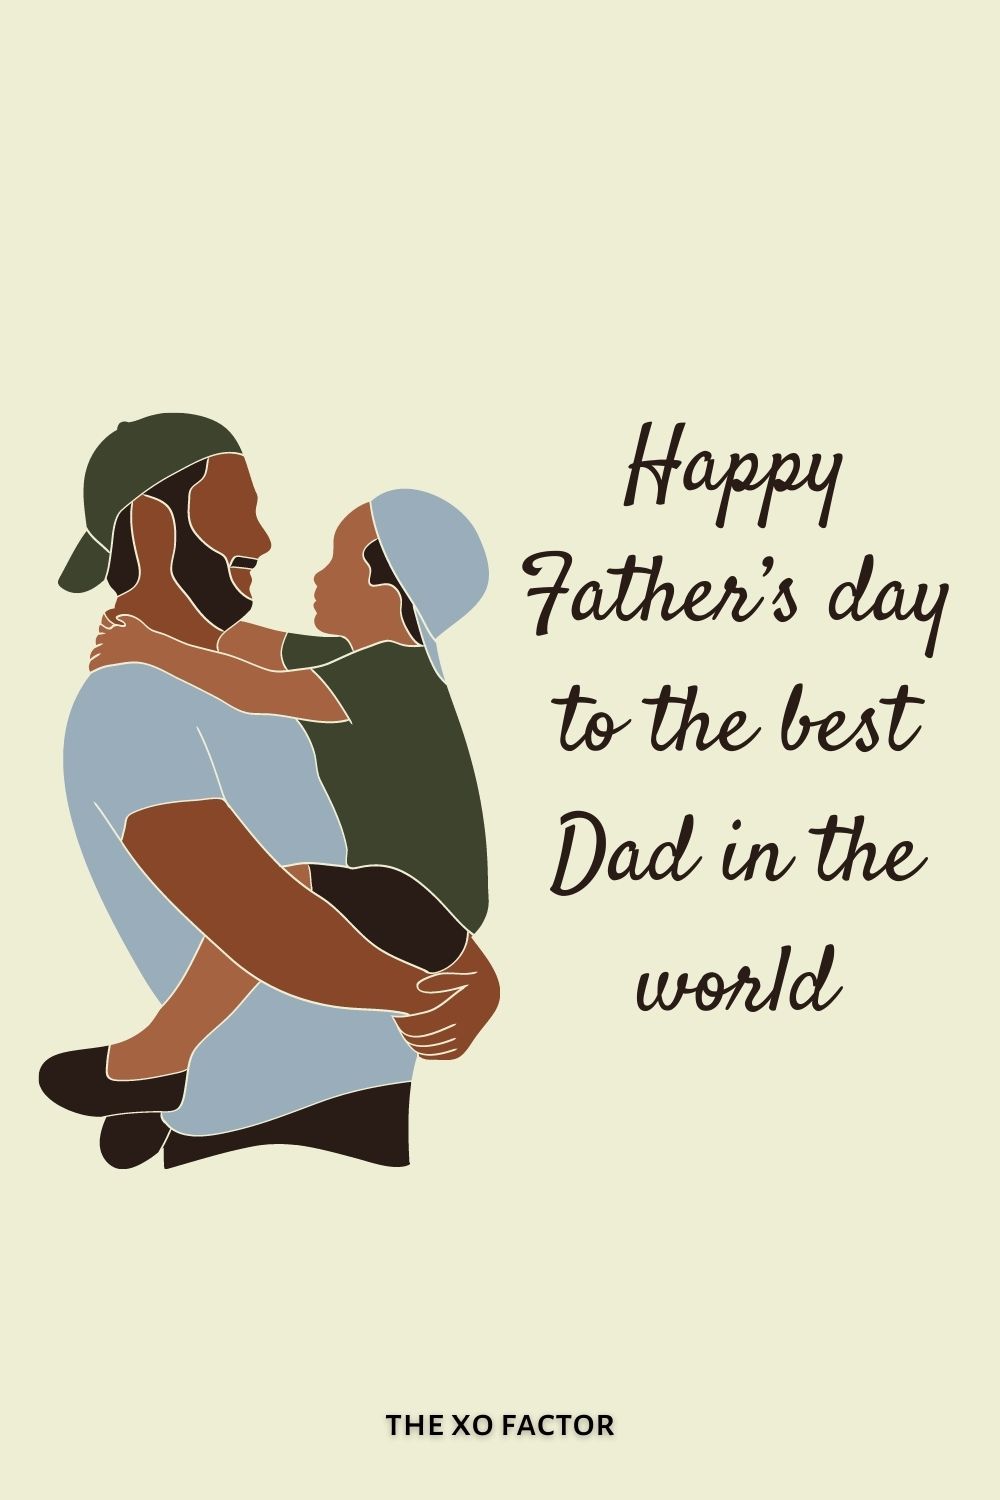 Happy Father’s day to the best Dad in the world father's day wishes